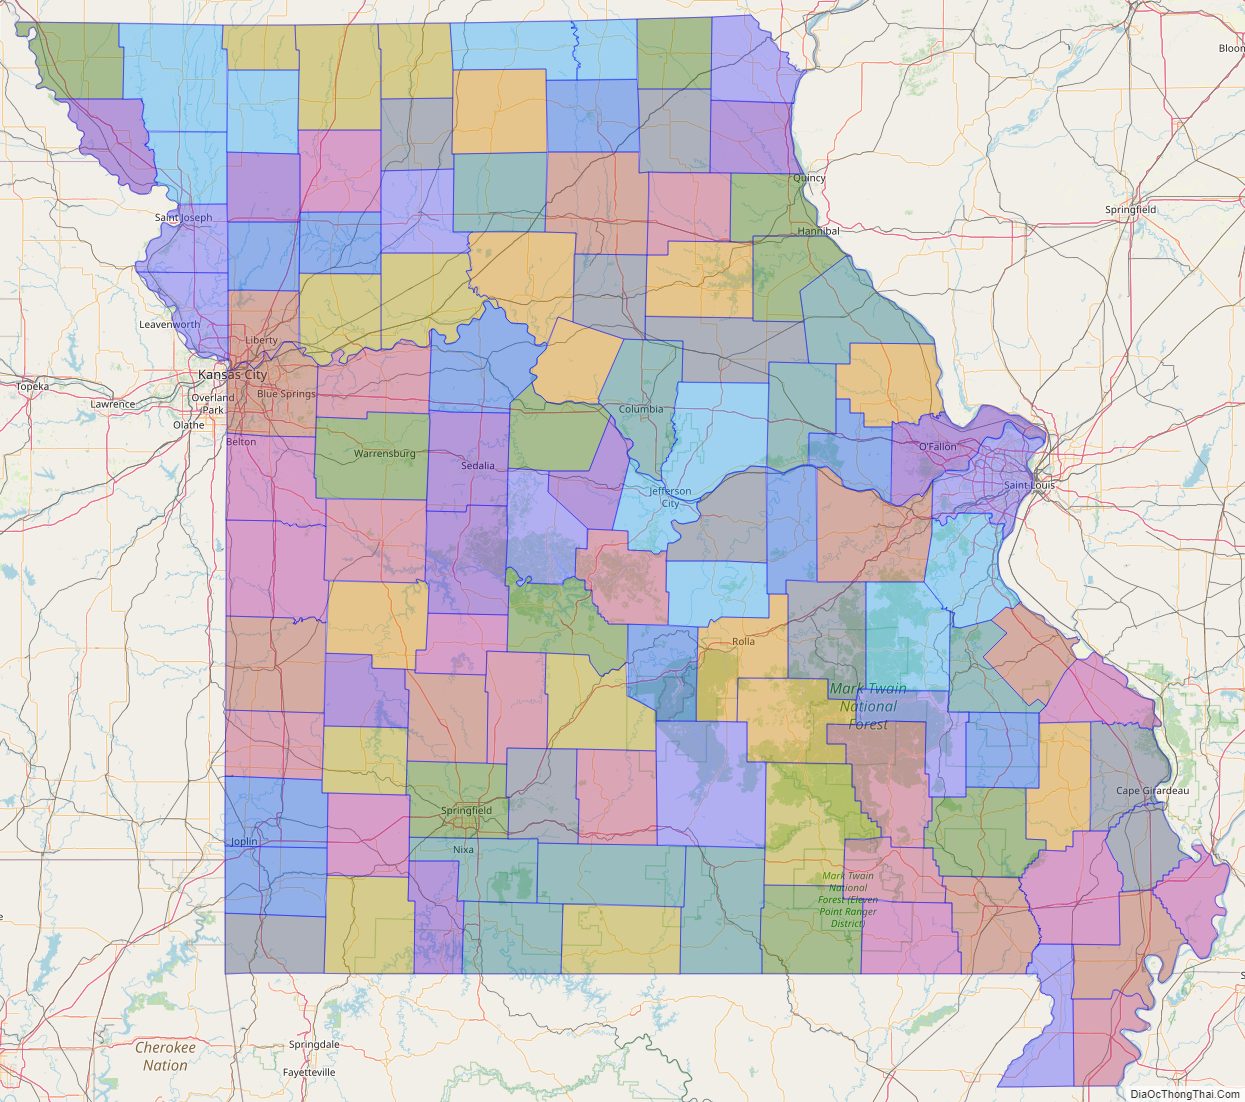 Printable - Large Scale Political Map of Missouri